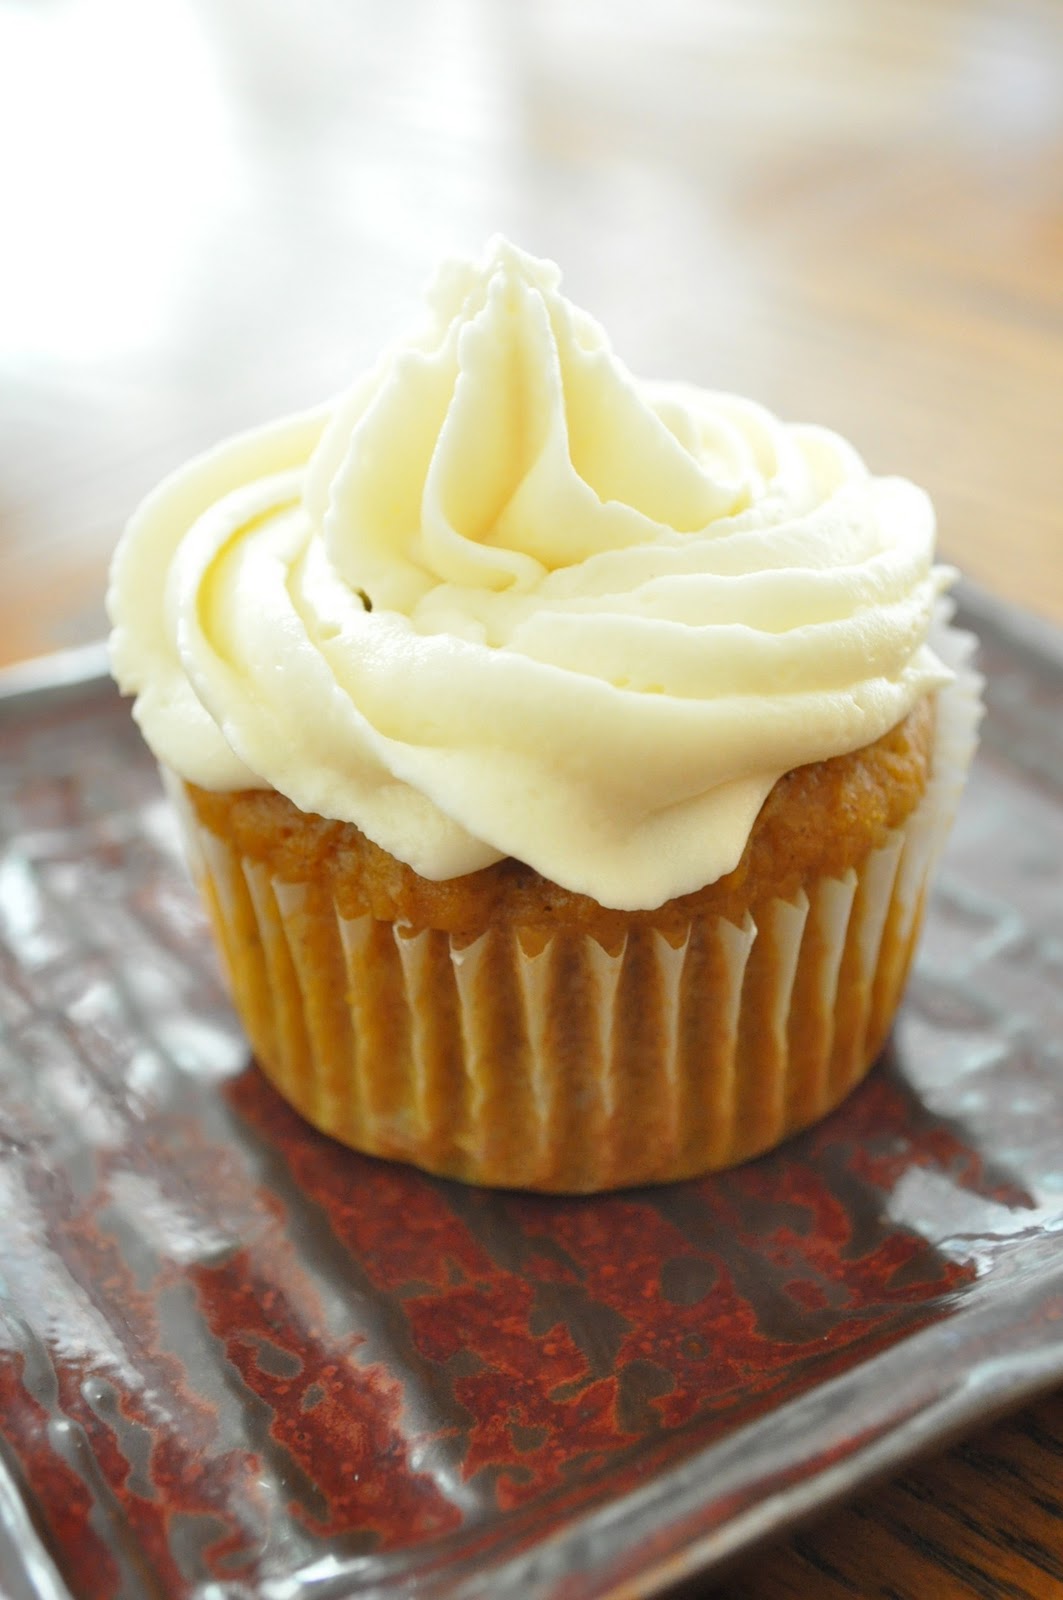 Freeing My Martha: Pumpkin Cupcakes with Maple-Cream Cheese Frosting